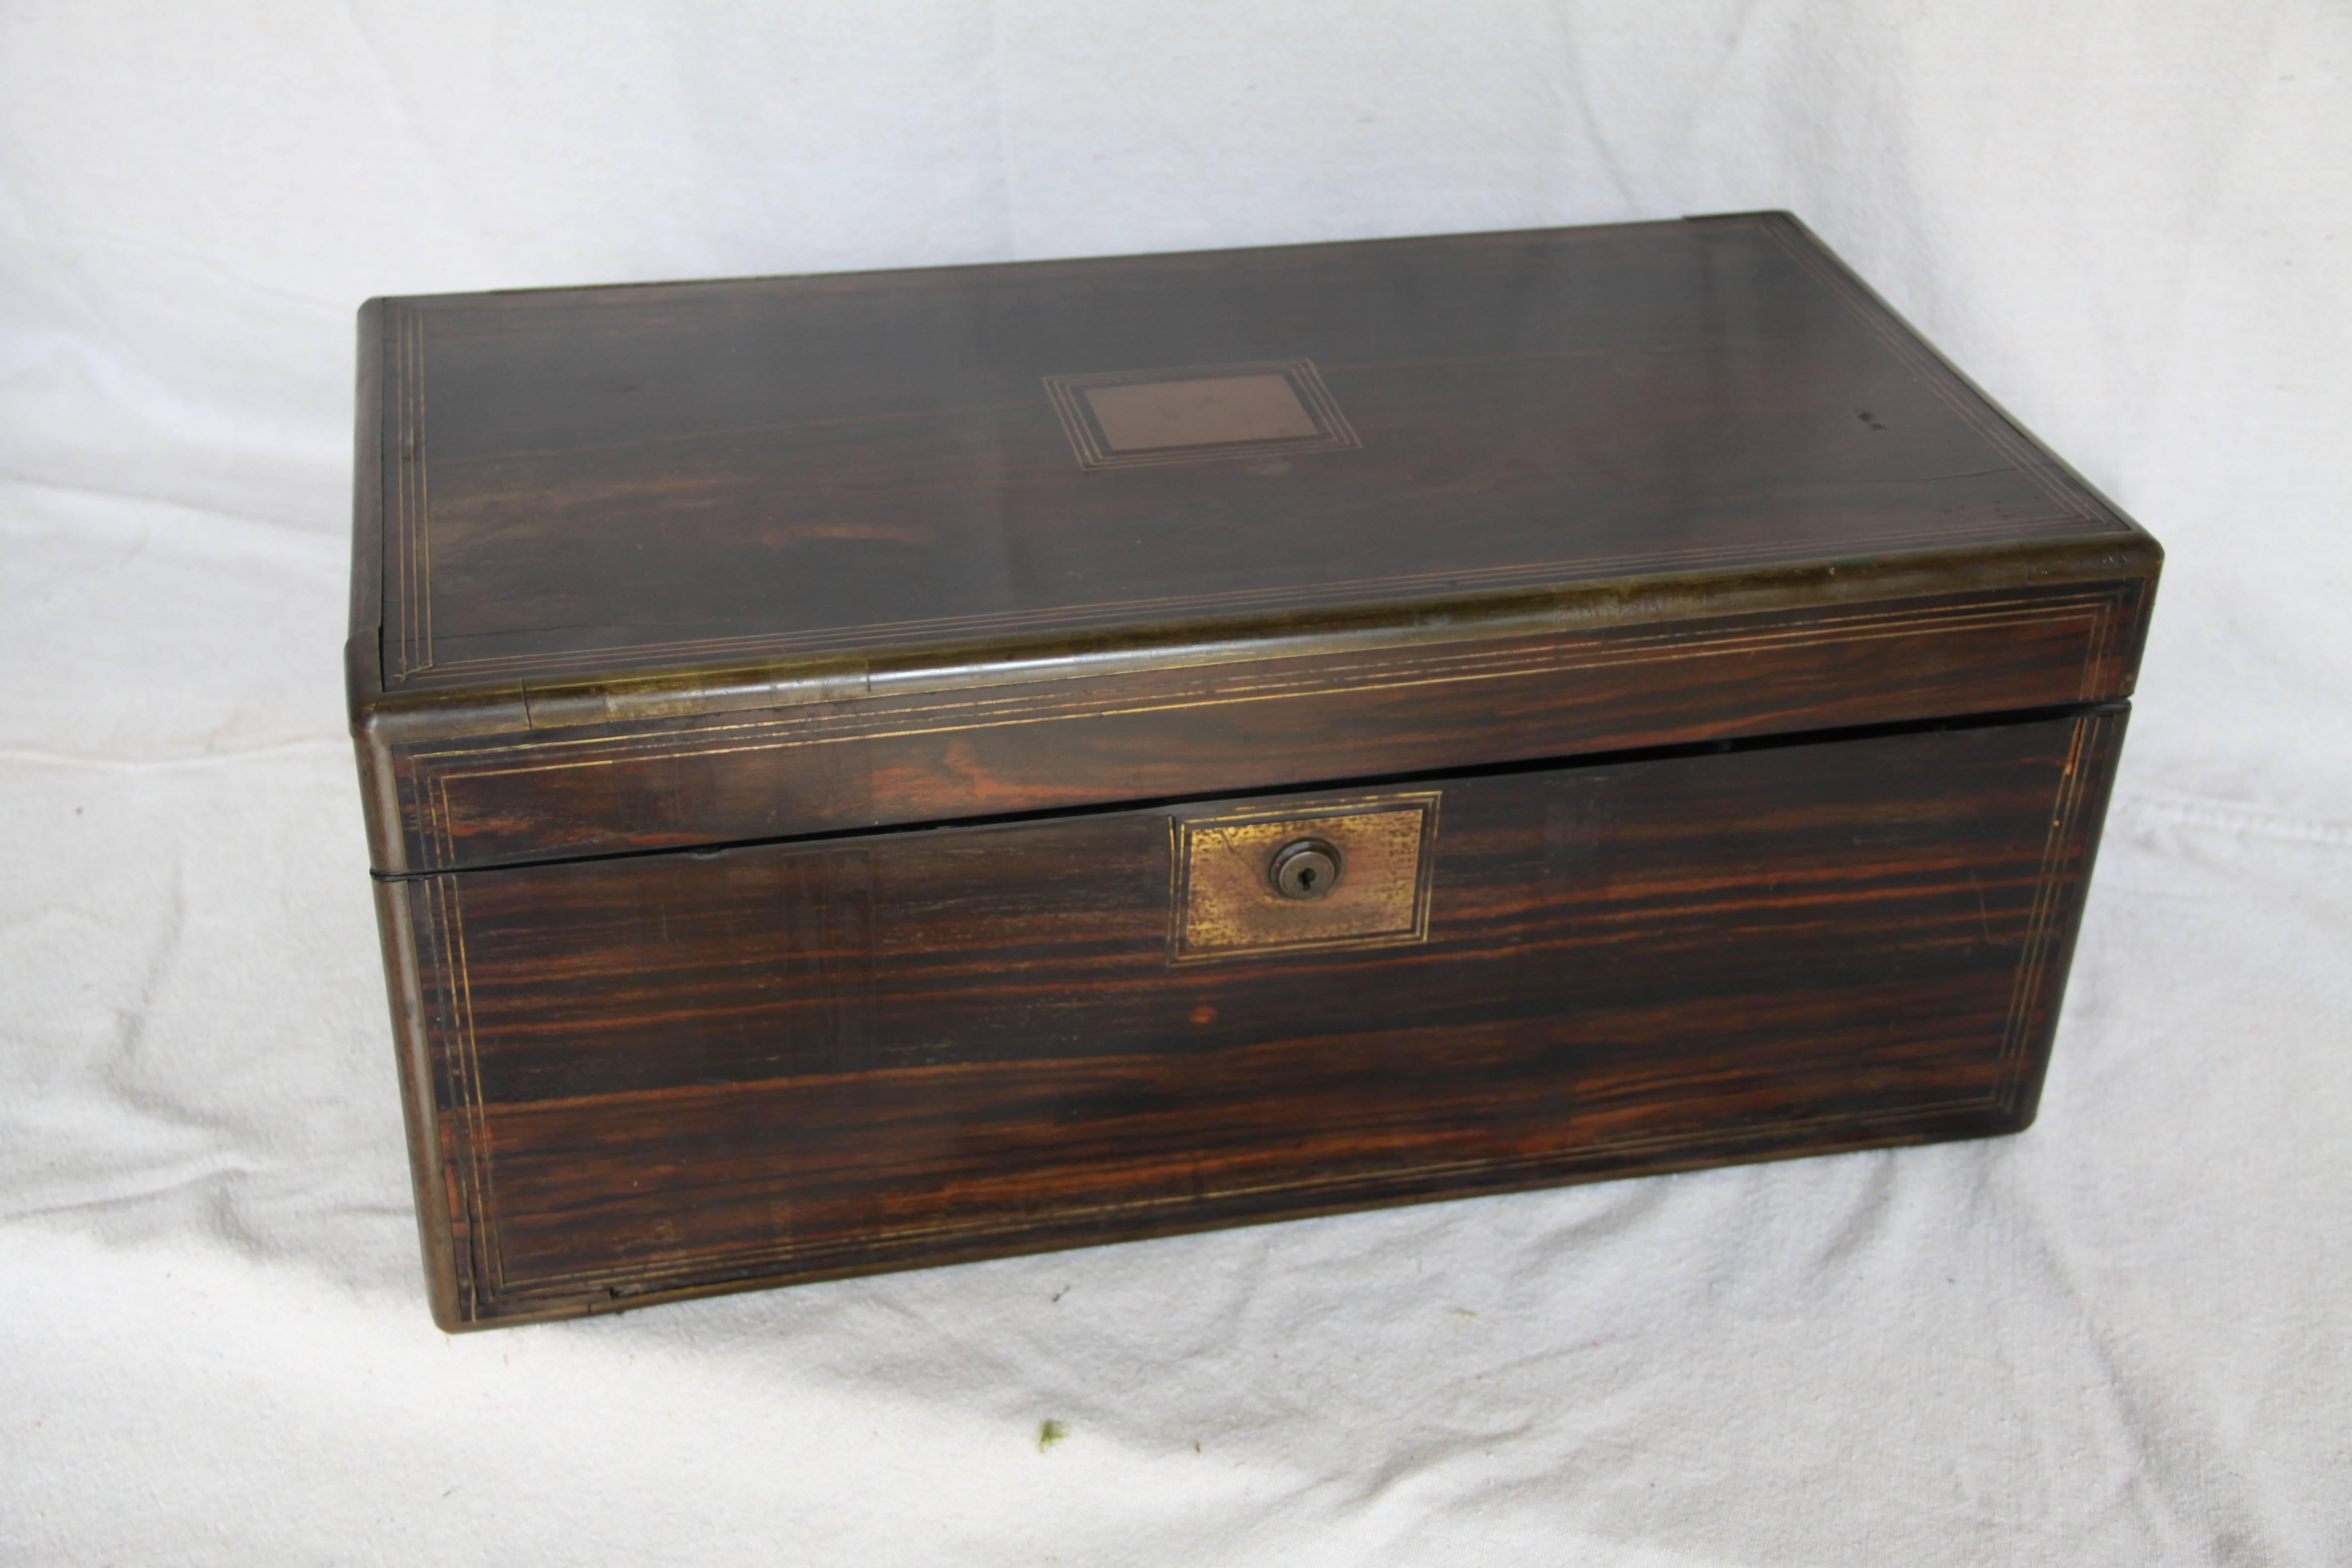 A large writing box with compartments found in France . Made of exotic wood with brass inlay banding, brass handles and escutcheon. A full-sized side drawer in the bottom is secured by a brass pin located in a slot in the interior. The surfaces of